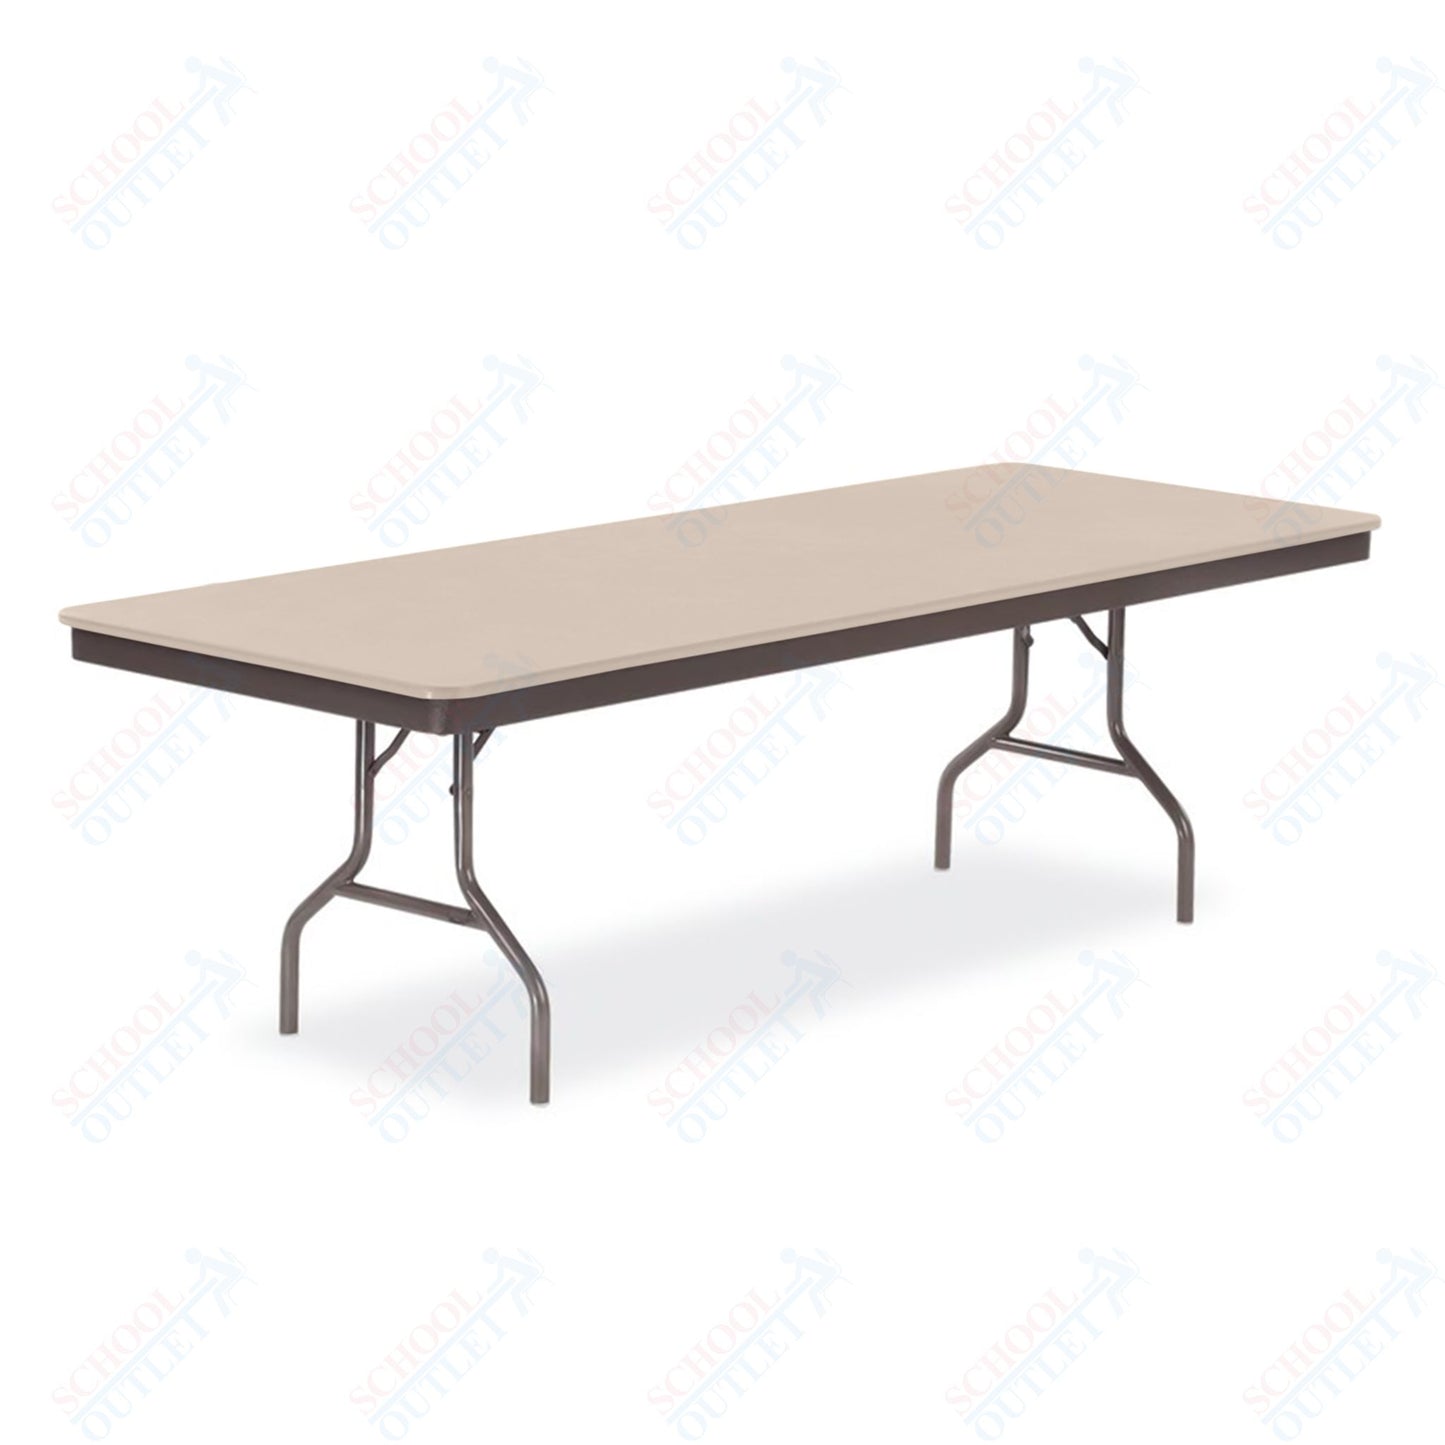 Virco 613696 - Core-a-gator, 36"x96", lightweight folding Table, Commercial Quality